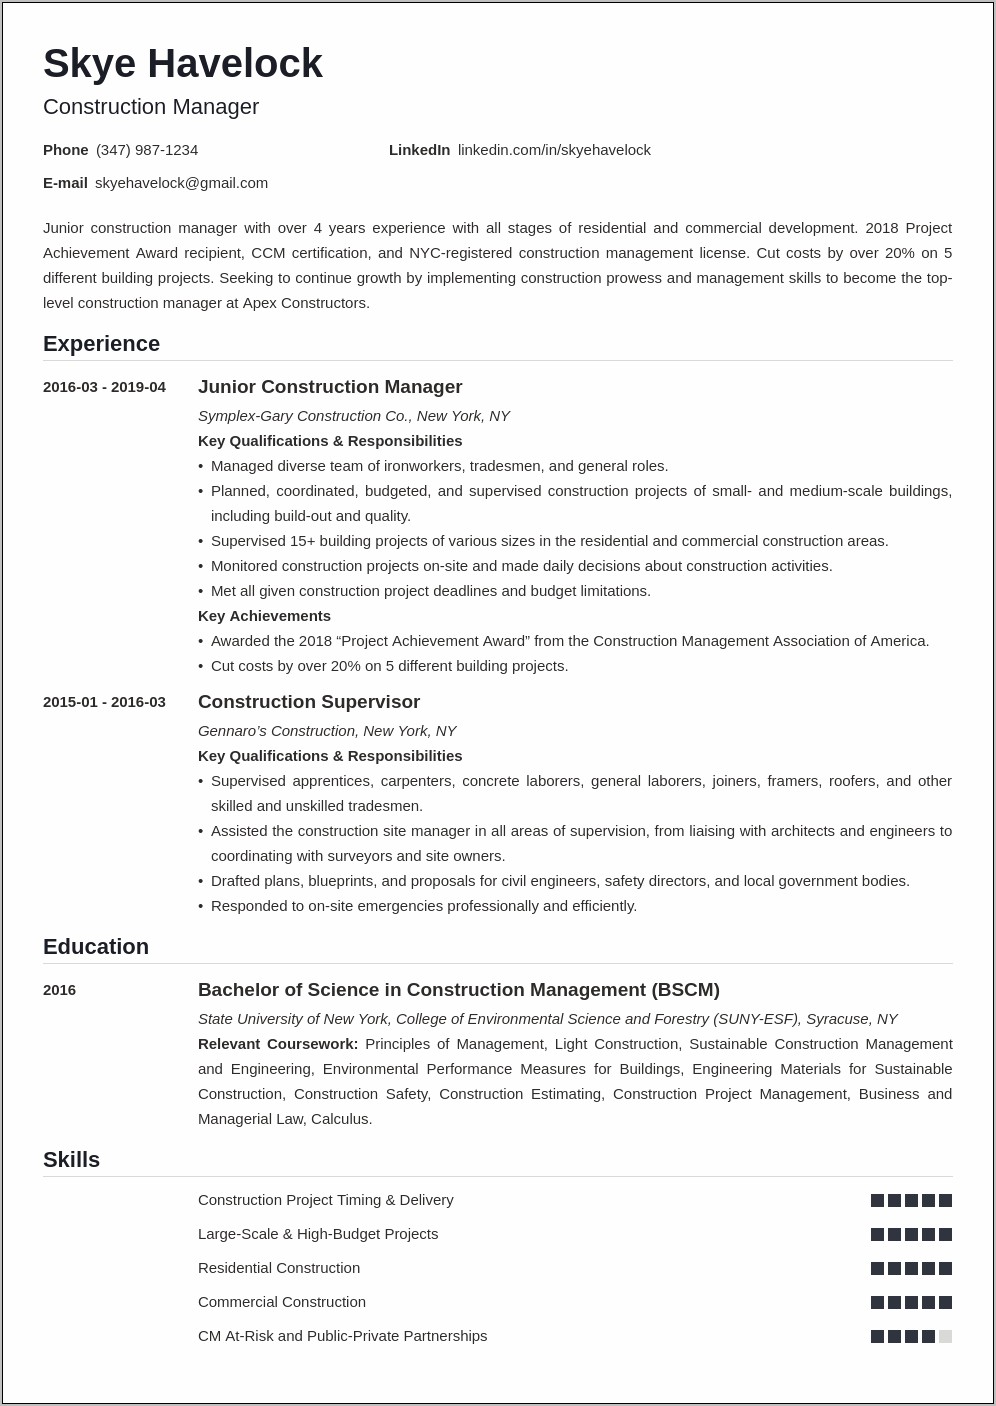 Resume Objective Statements Construction Industry